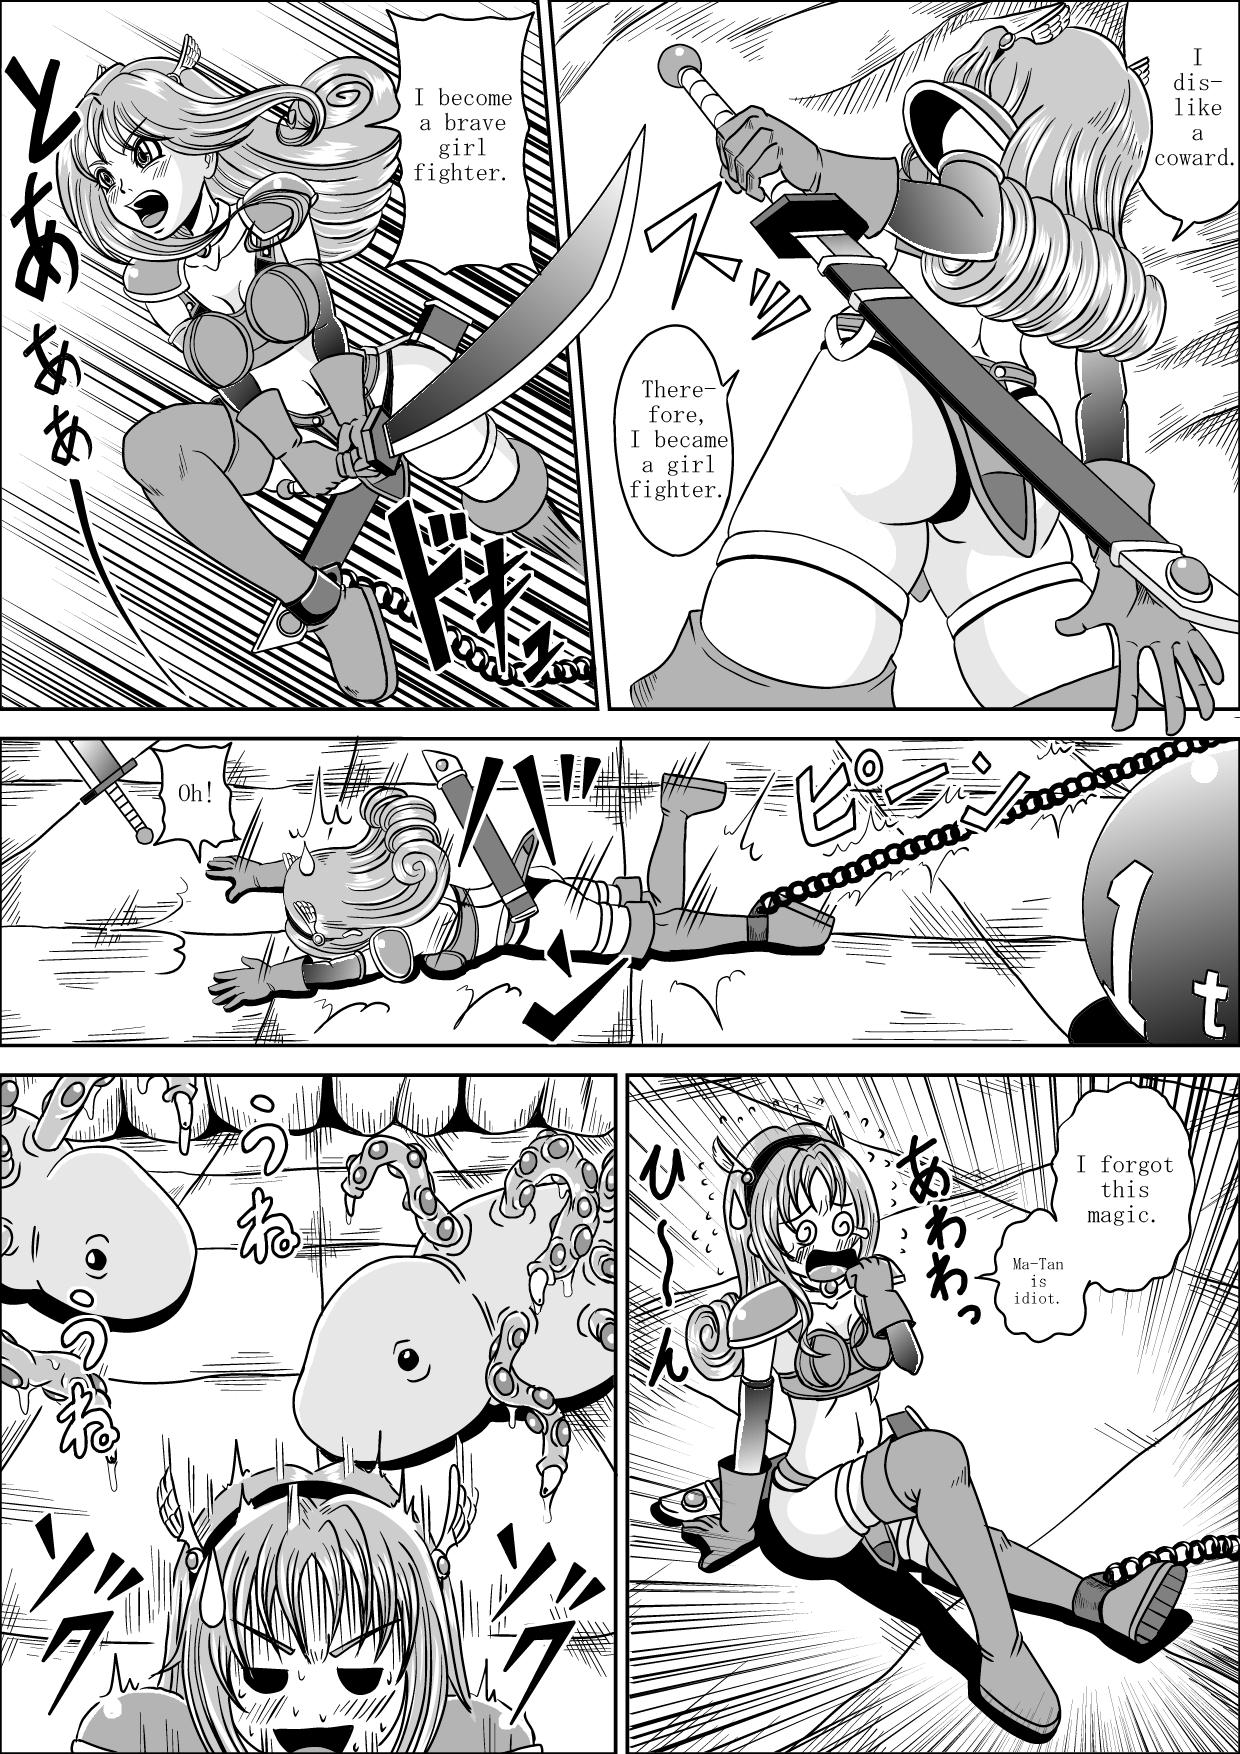 Suck Cock A FAINTHEARTED GIRL FIGHTER CHI-CHAN'S ADVENTURE Gay Cut - Page 9